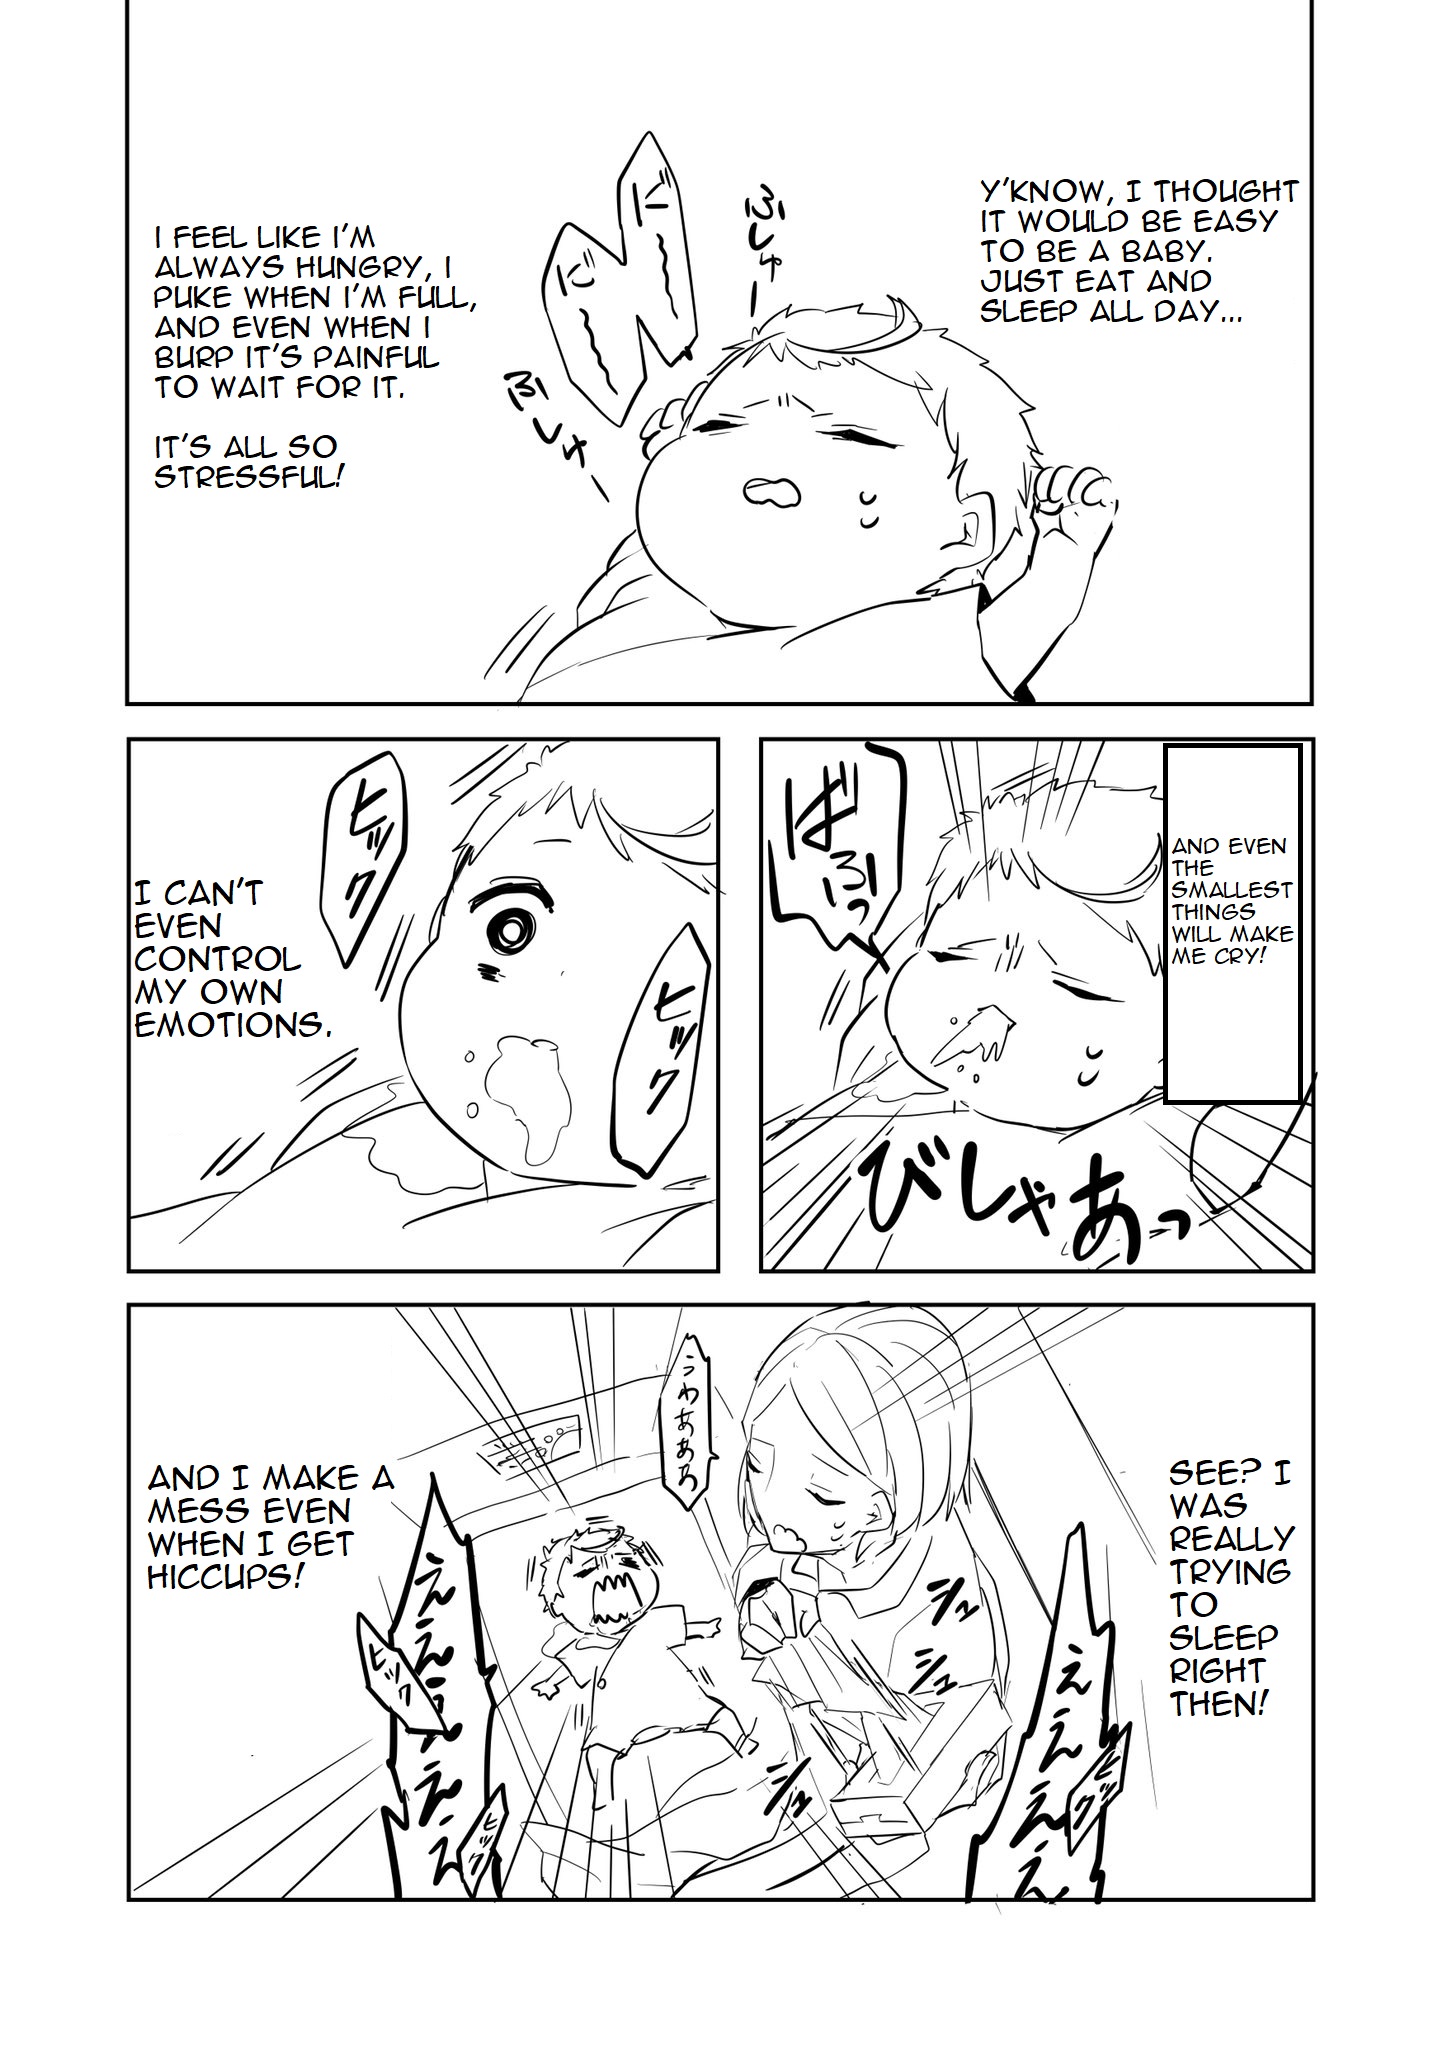 A Story About Being Reborn As A Baby (Pre-Serialization) - Page 1